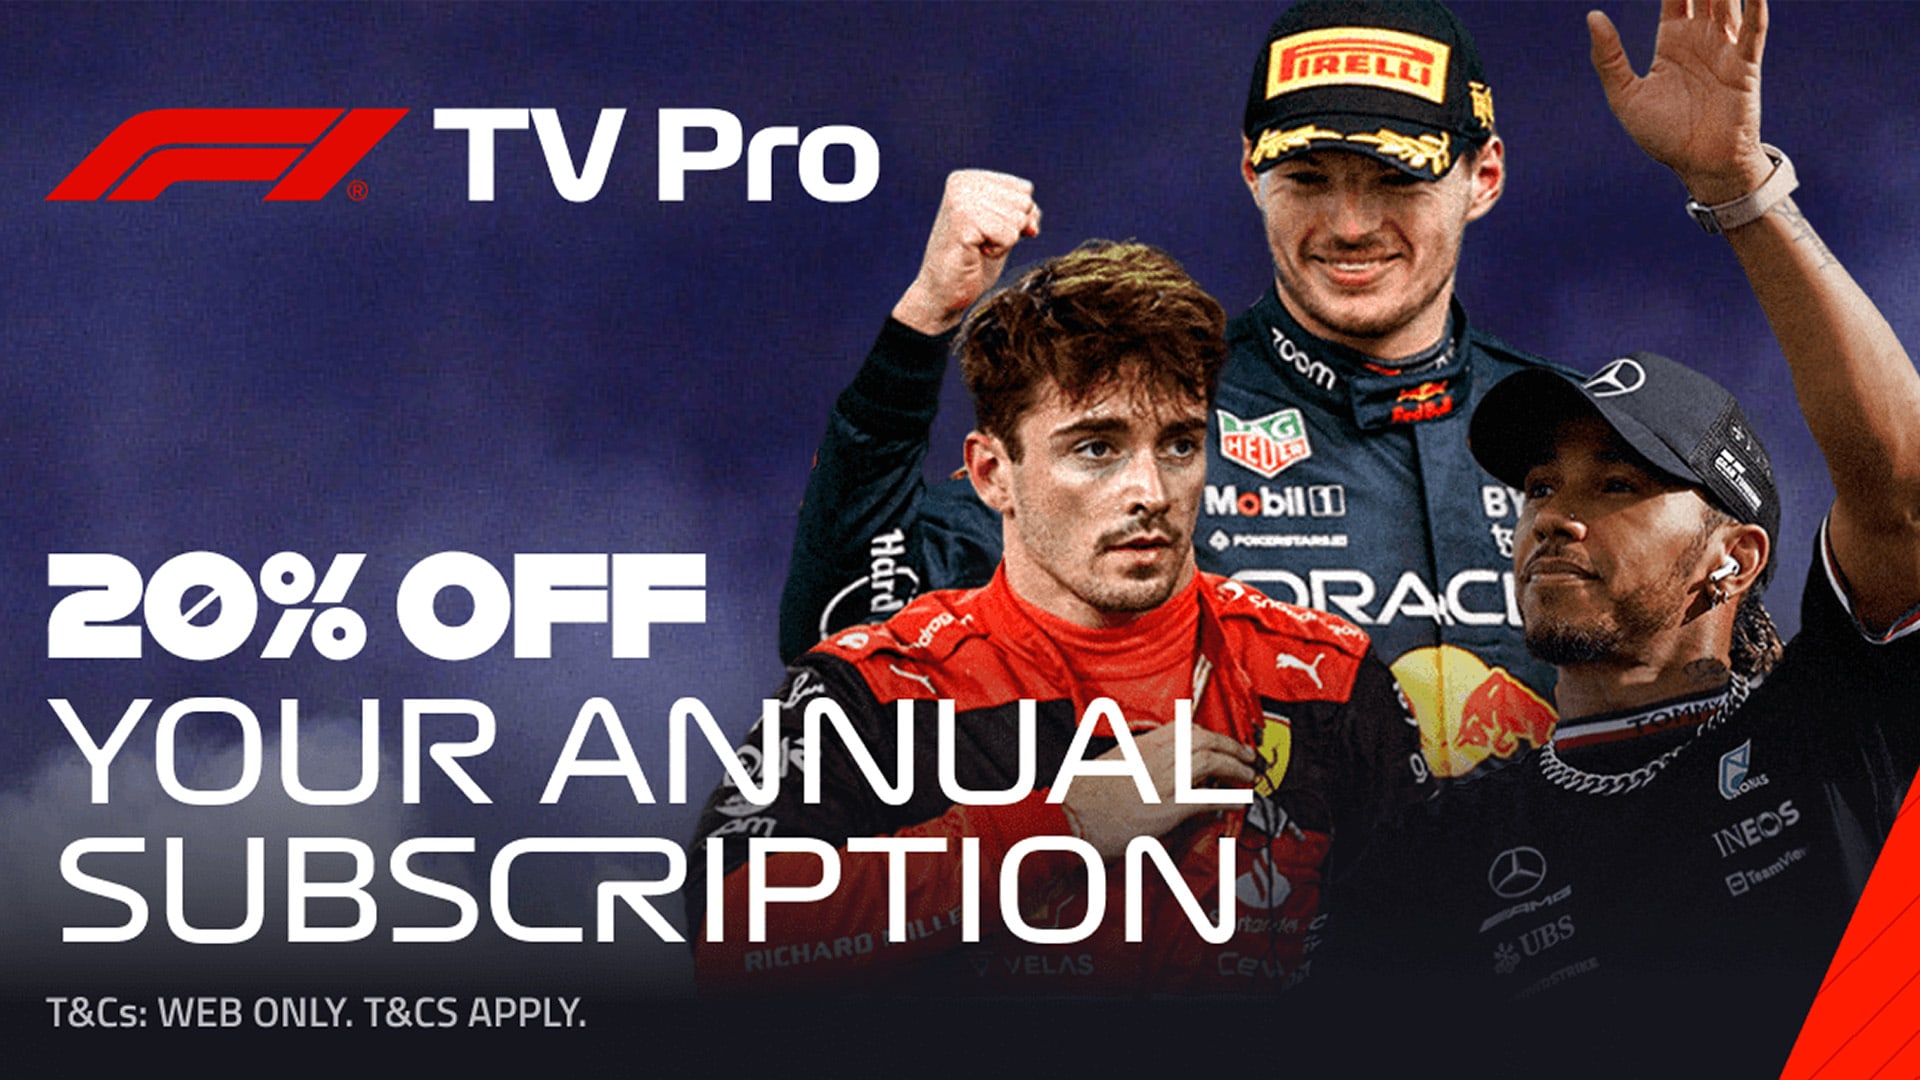 Get up to speed on the 2023 season with F1 TV Pro and enjoy 20 off